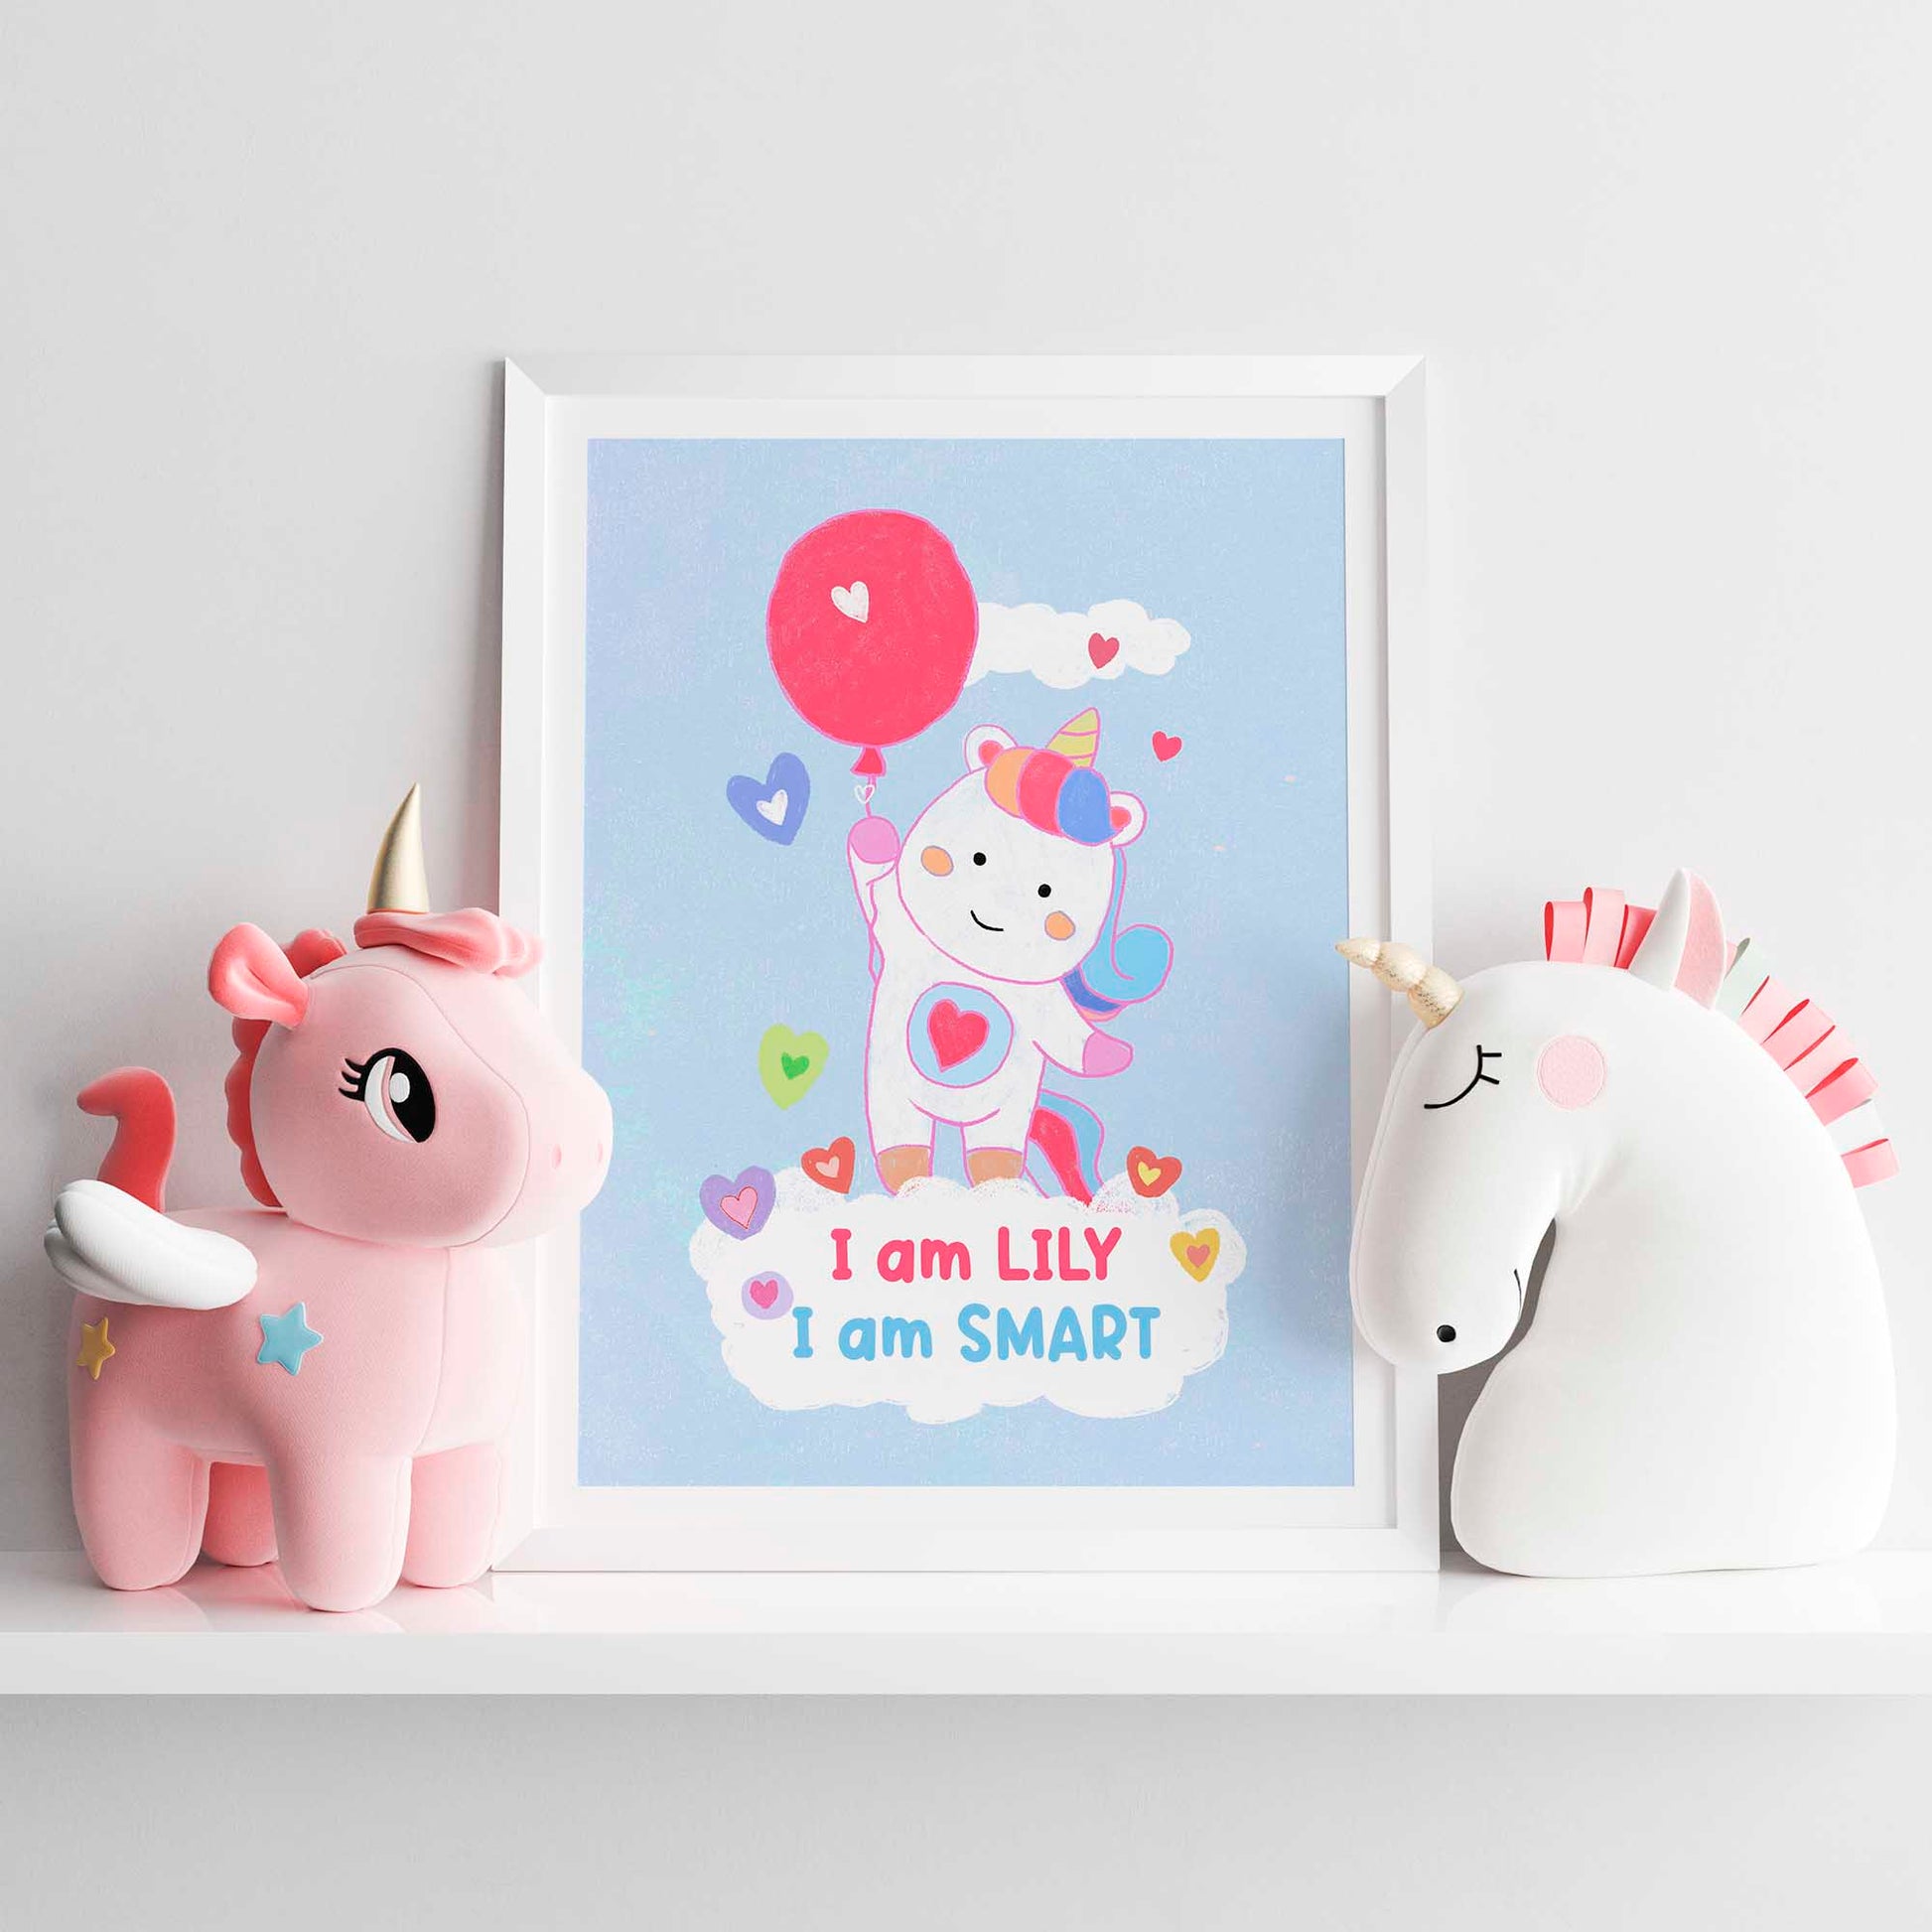 Colorful unicorn poster with heartening affirmations, ideal for a girl's room decor.